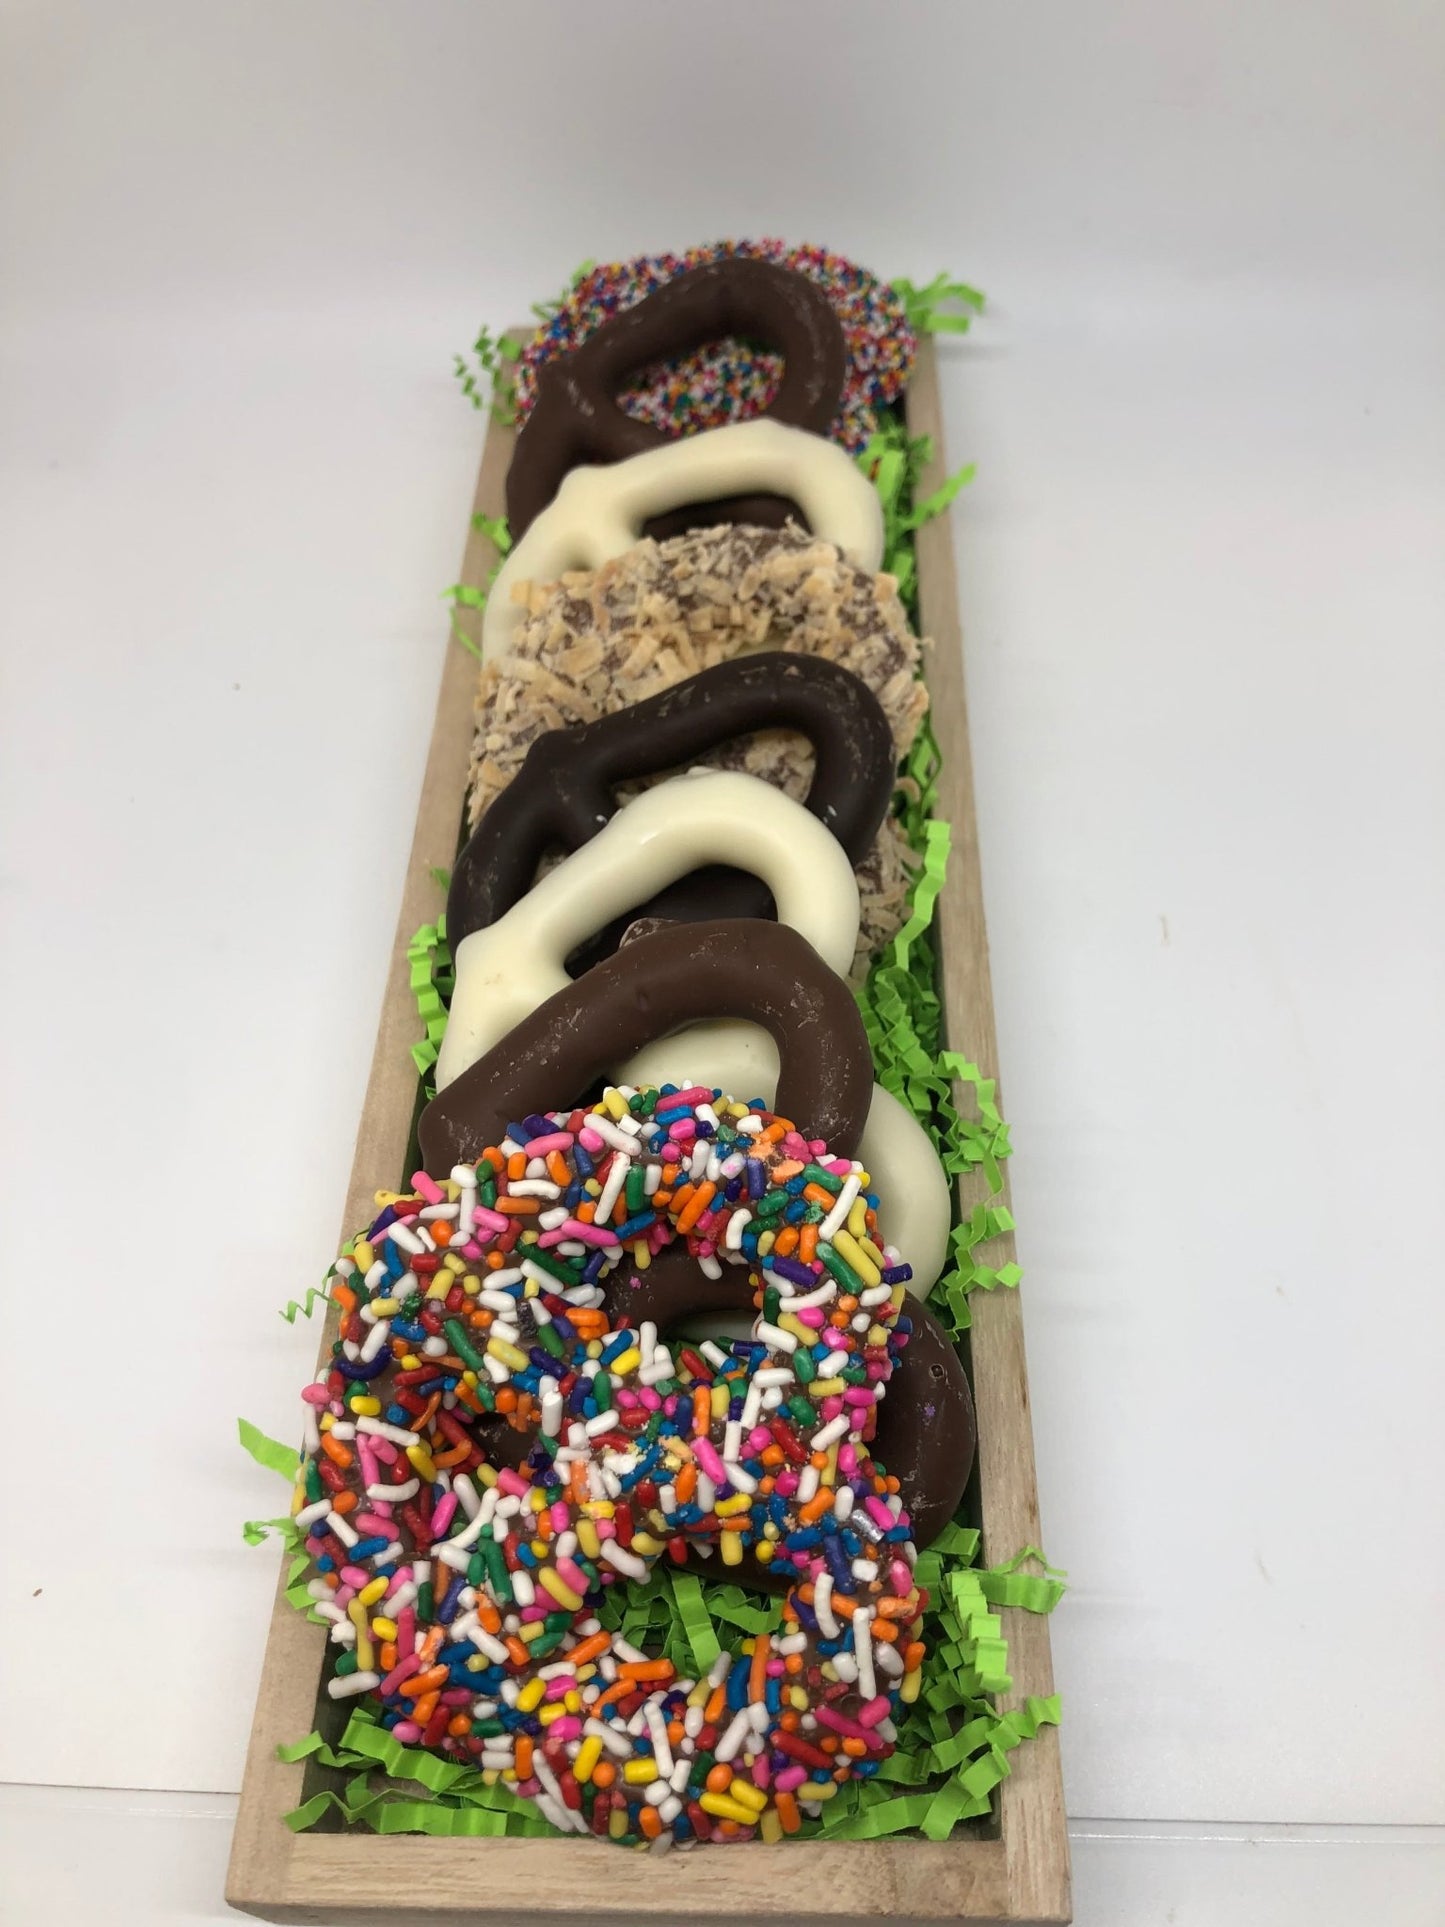 Gourmet Chocolate & Pretzel Tray - Sweeties Candy Cottage